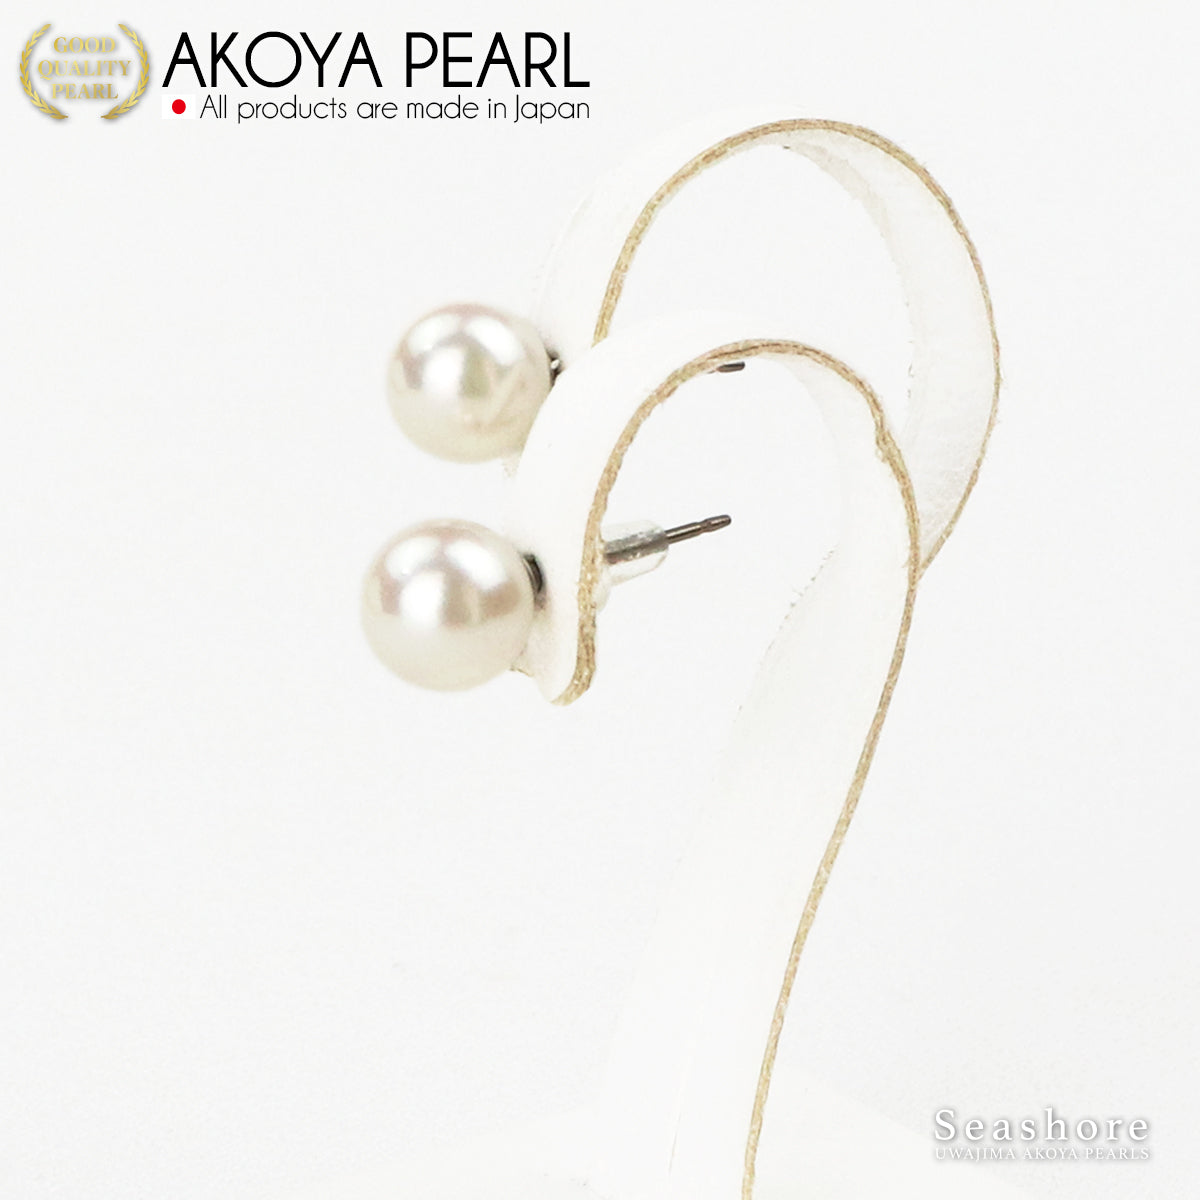 Akoya Pearl Formal Necklace Set of 2 [7.0-7.5mm] (Earrings included) Debut Size Formal Set with Certificate of Authenticity and Storage Case